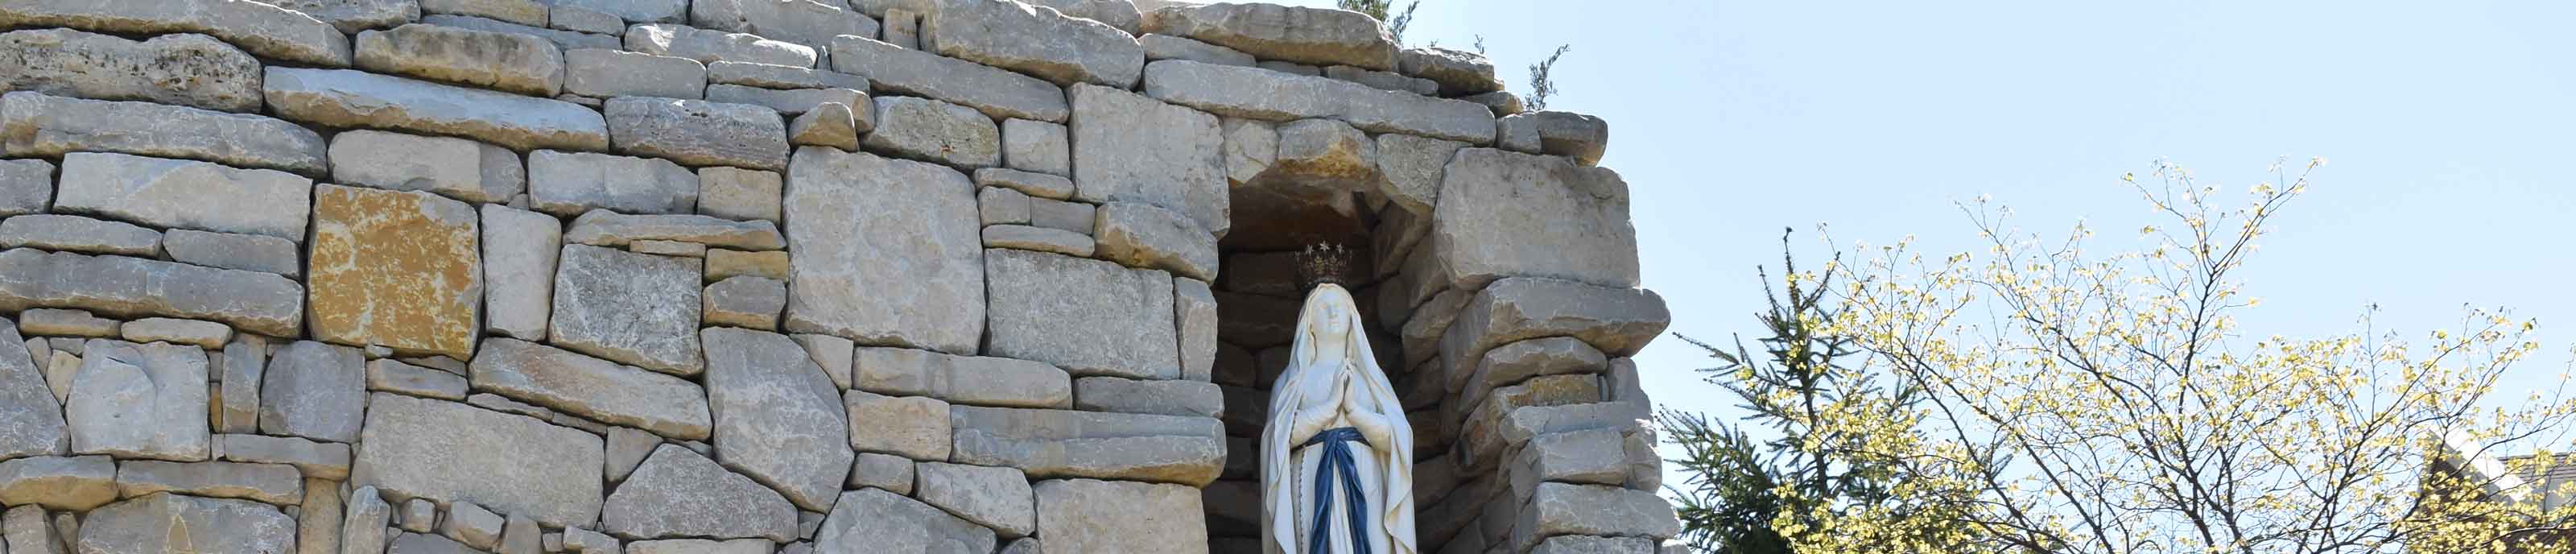 The statue of the Blessed Mother in Mary's Grotto